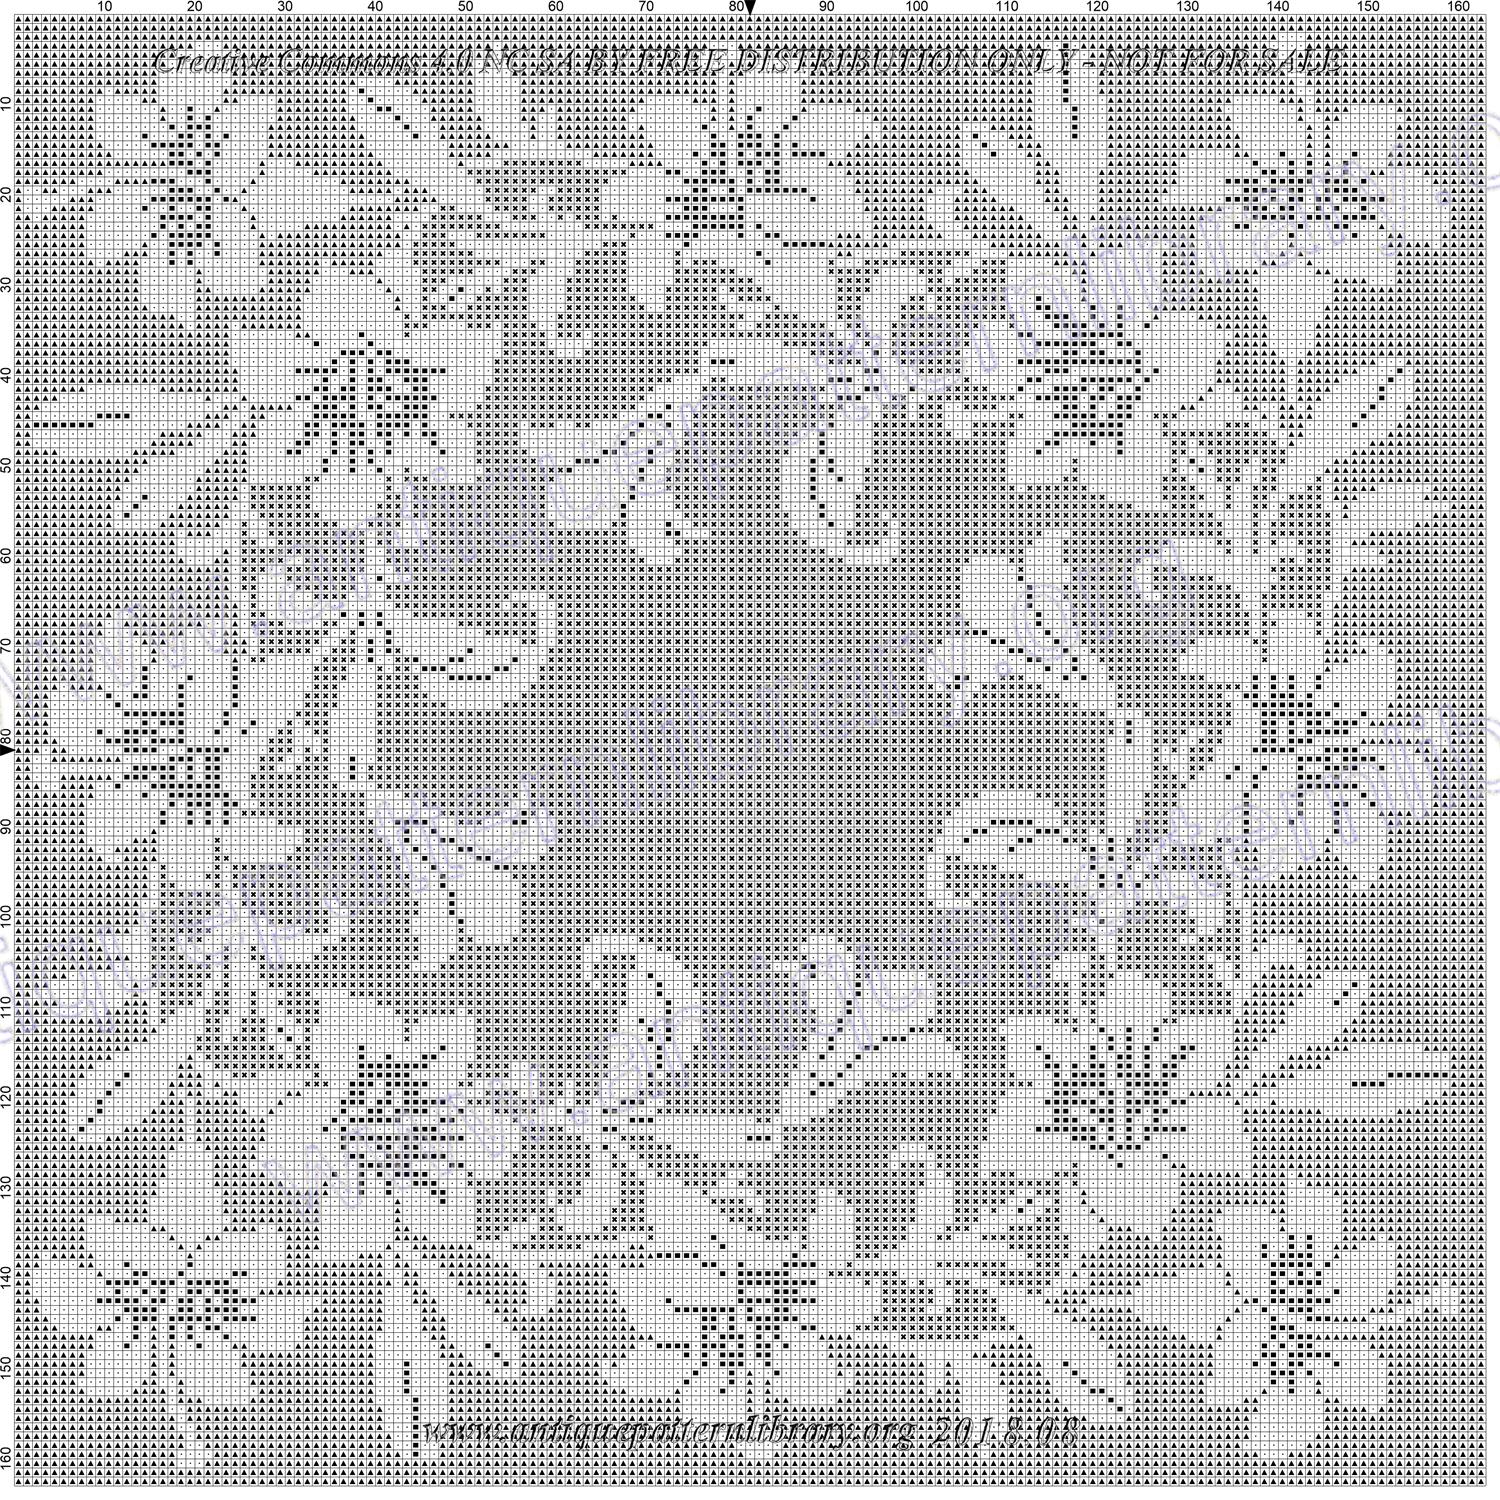 I-BT001 Antique large beadwork panel floral design small white glass beads on tapestry